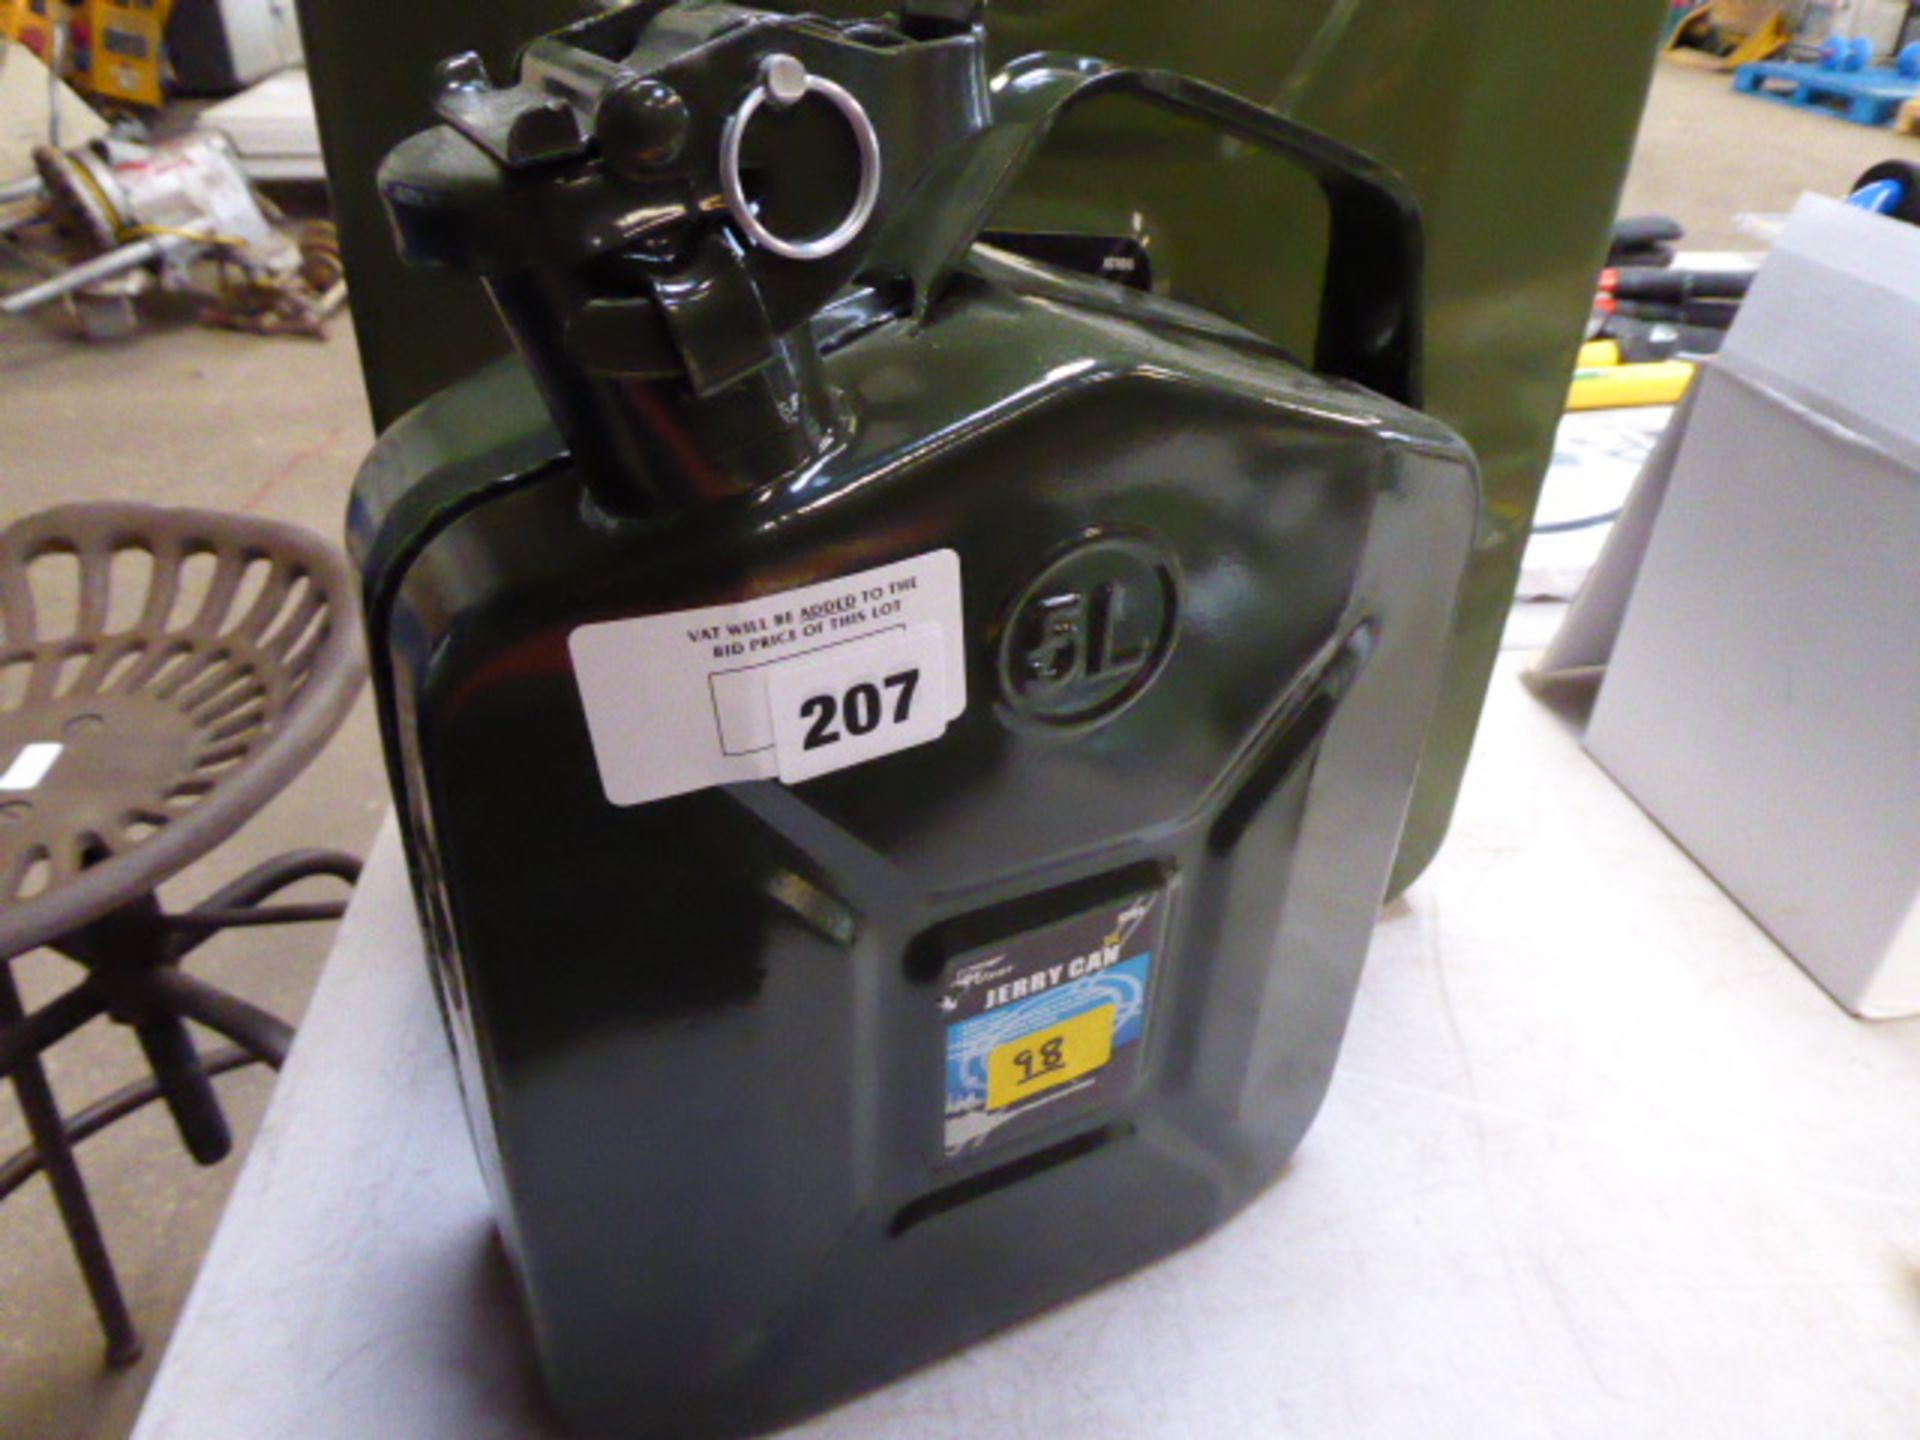 98 - 5L jerry can